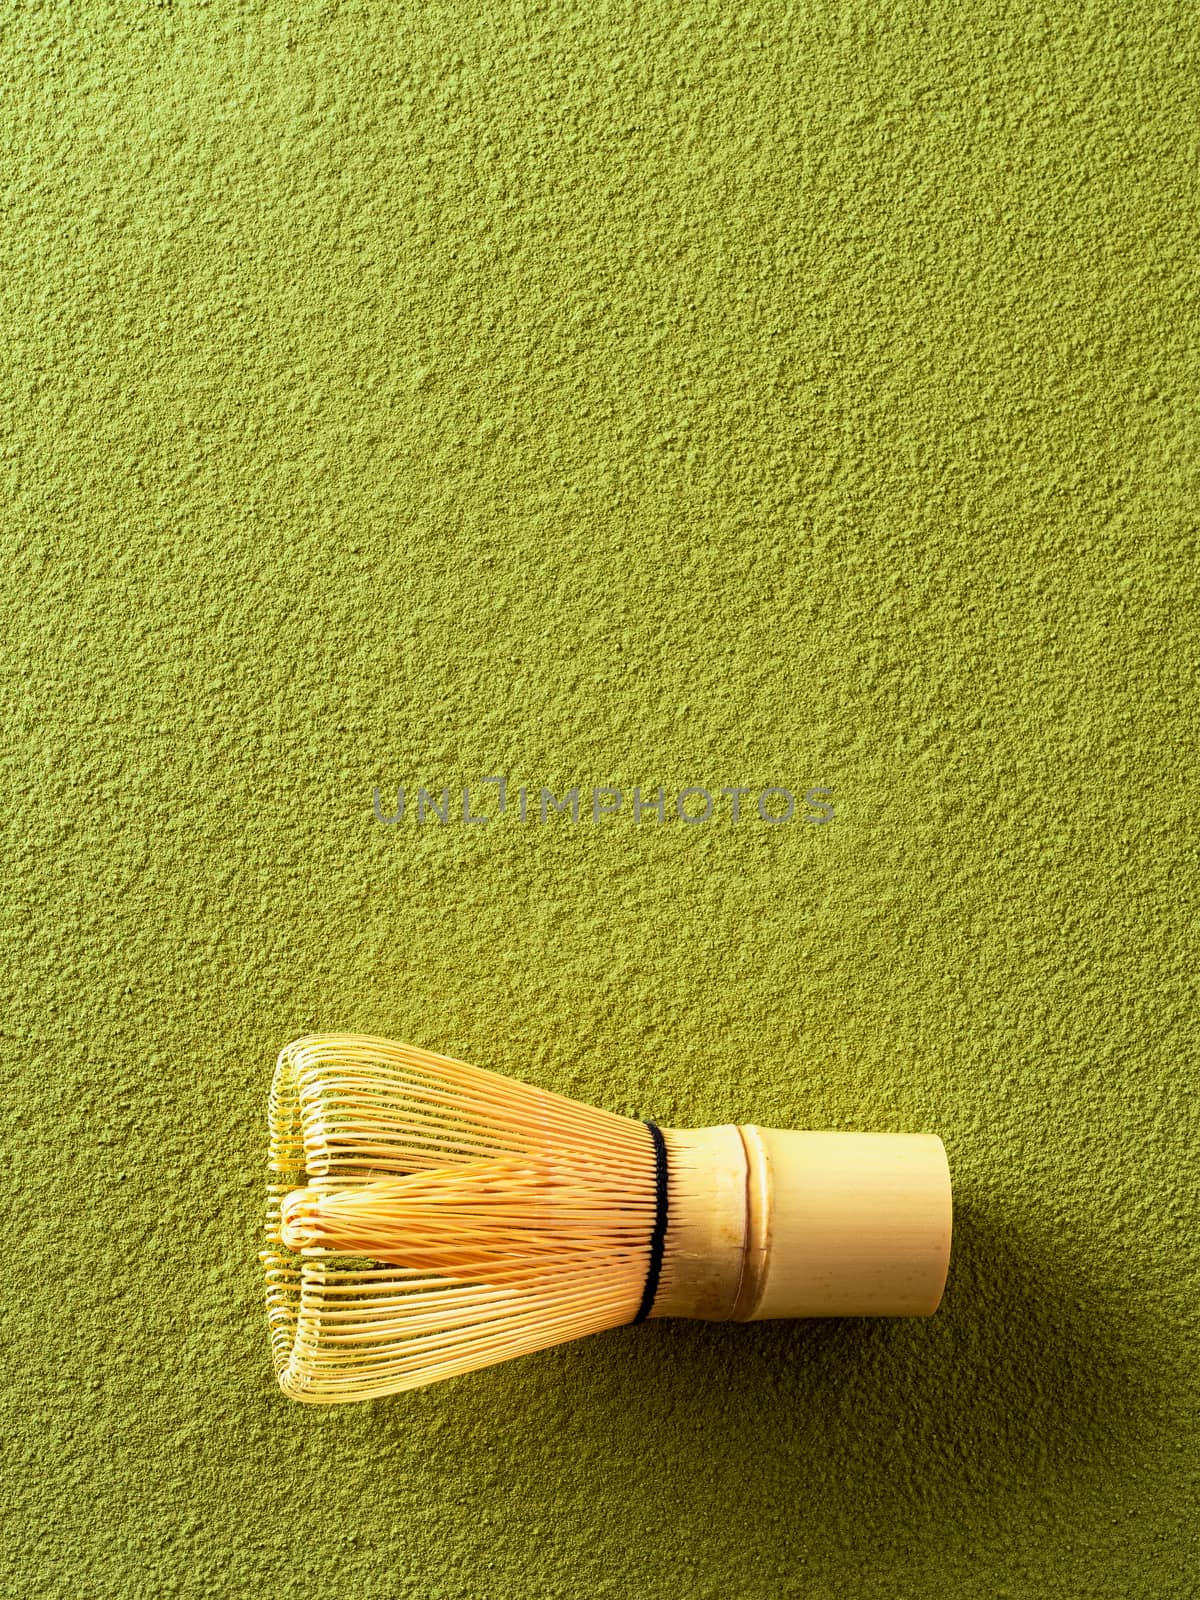 Powdered green tea Matcha background and bamboo whisk Chasen. Copy space for text or design. Vertical